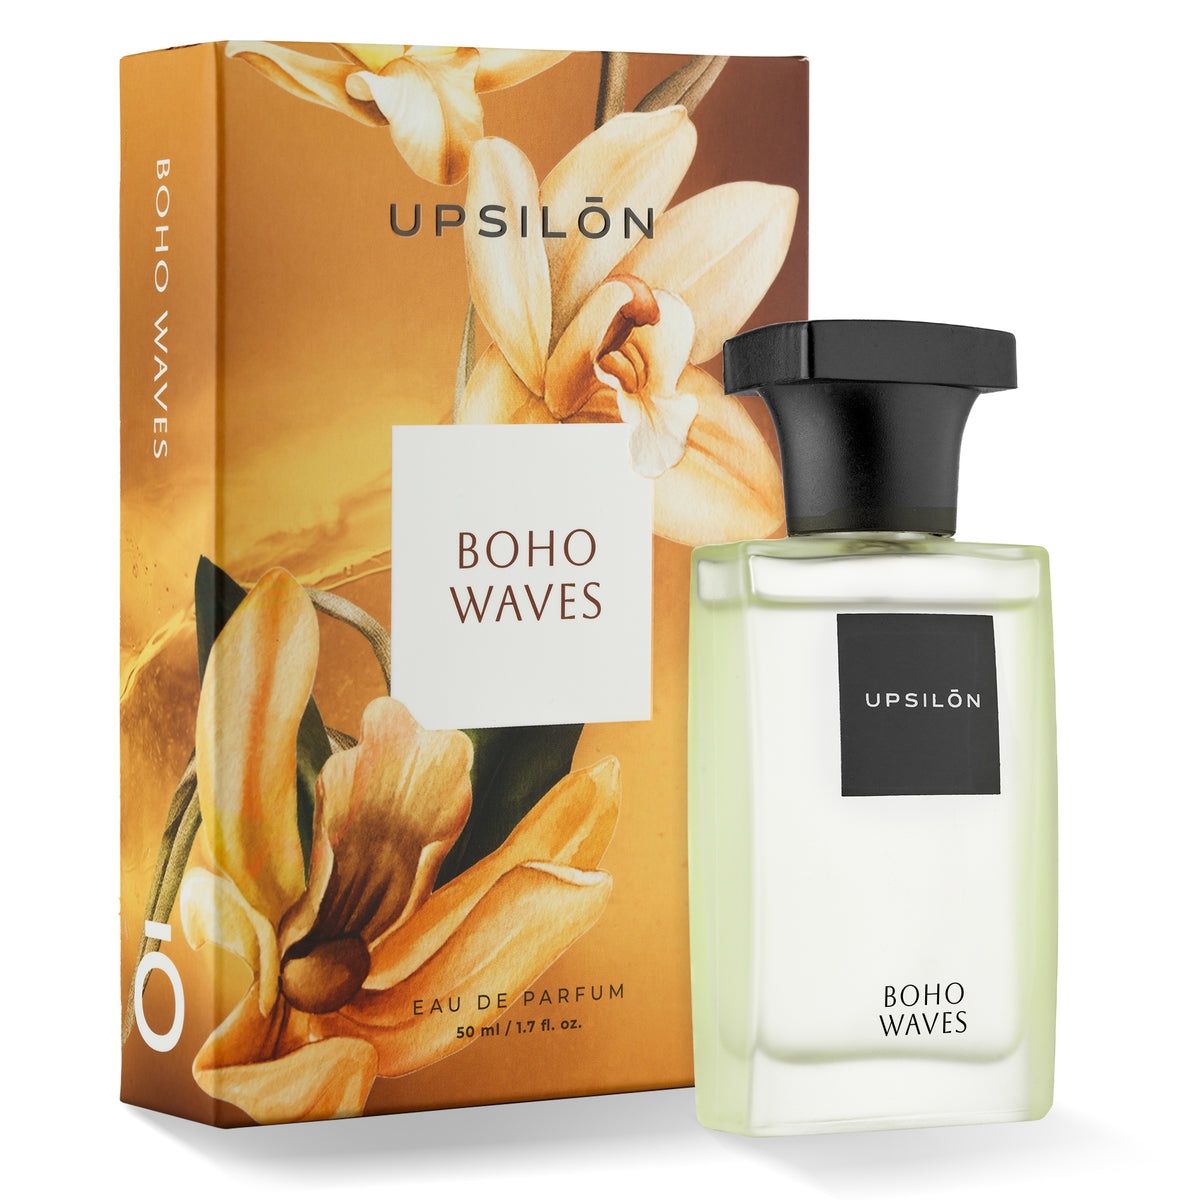 A luxurious bottle of "Boho Waves" Eau de Parfum by UPSILON, adorned with a delicate pink flower, rests upon a cool marble surface.